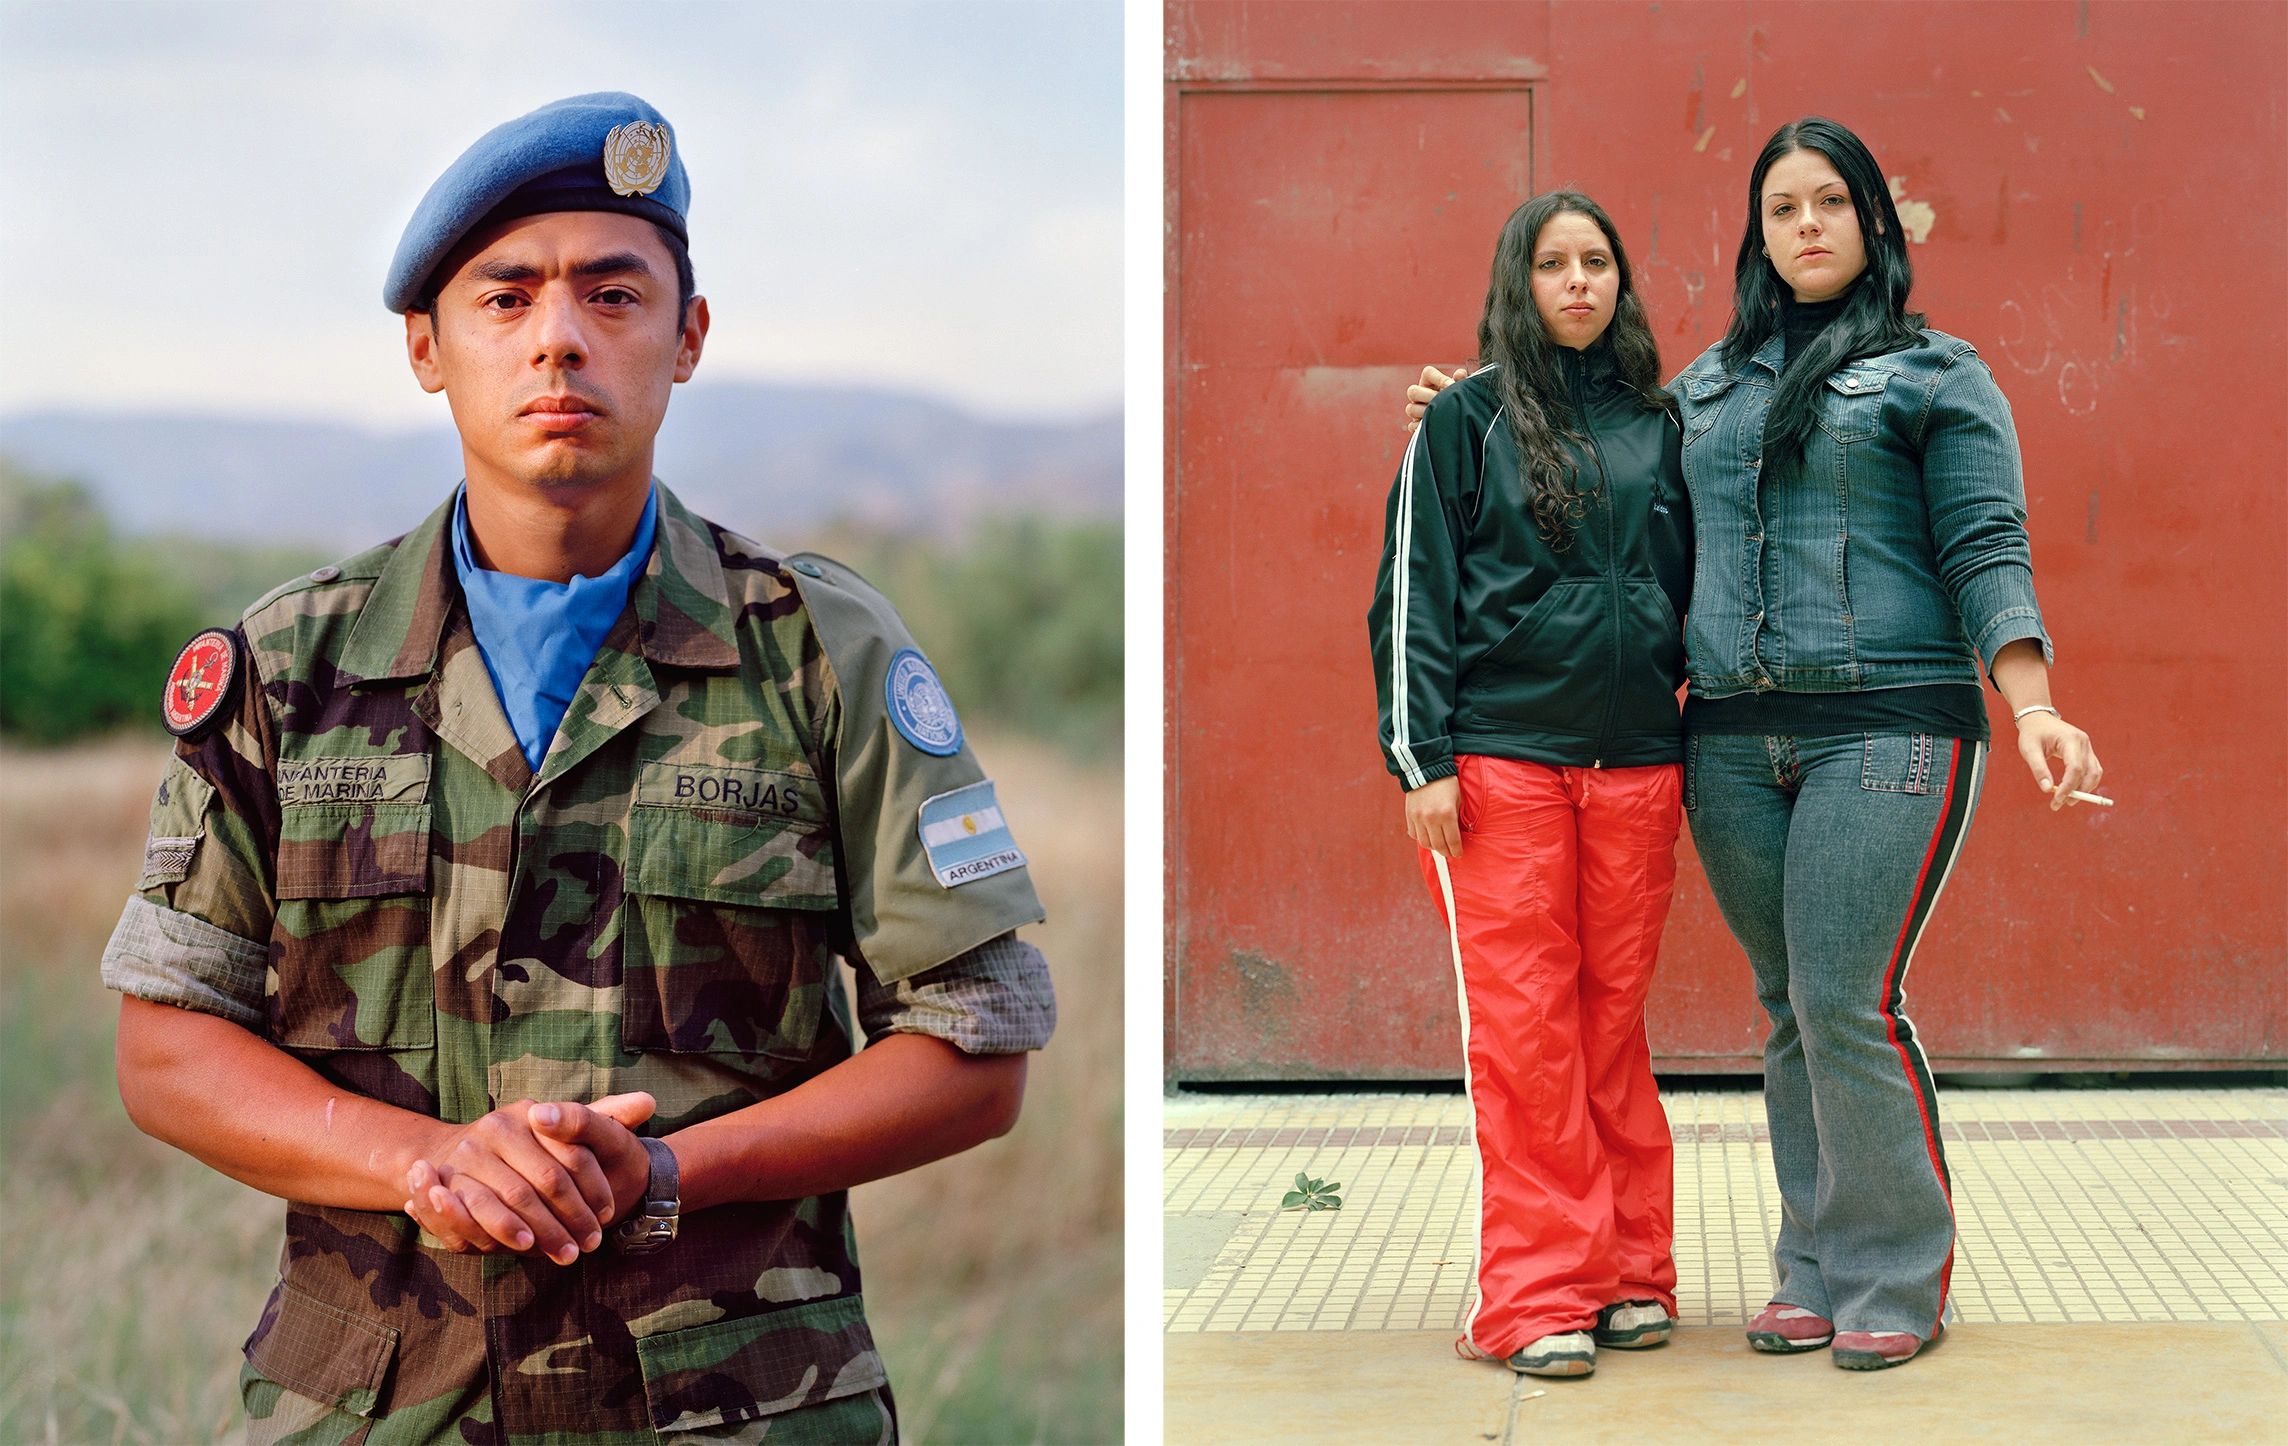 Portraits of UN Peacekeepers in Cyprus and inmates of a women's prison in Lima, Peru.